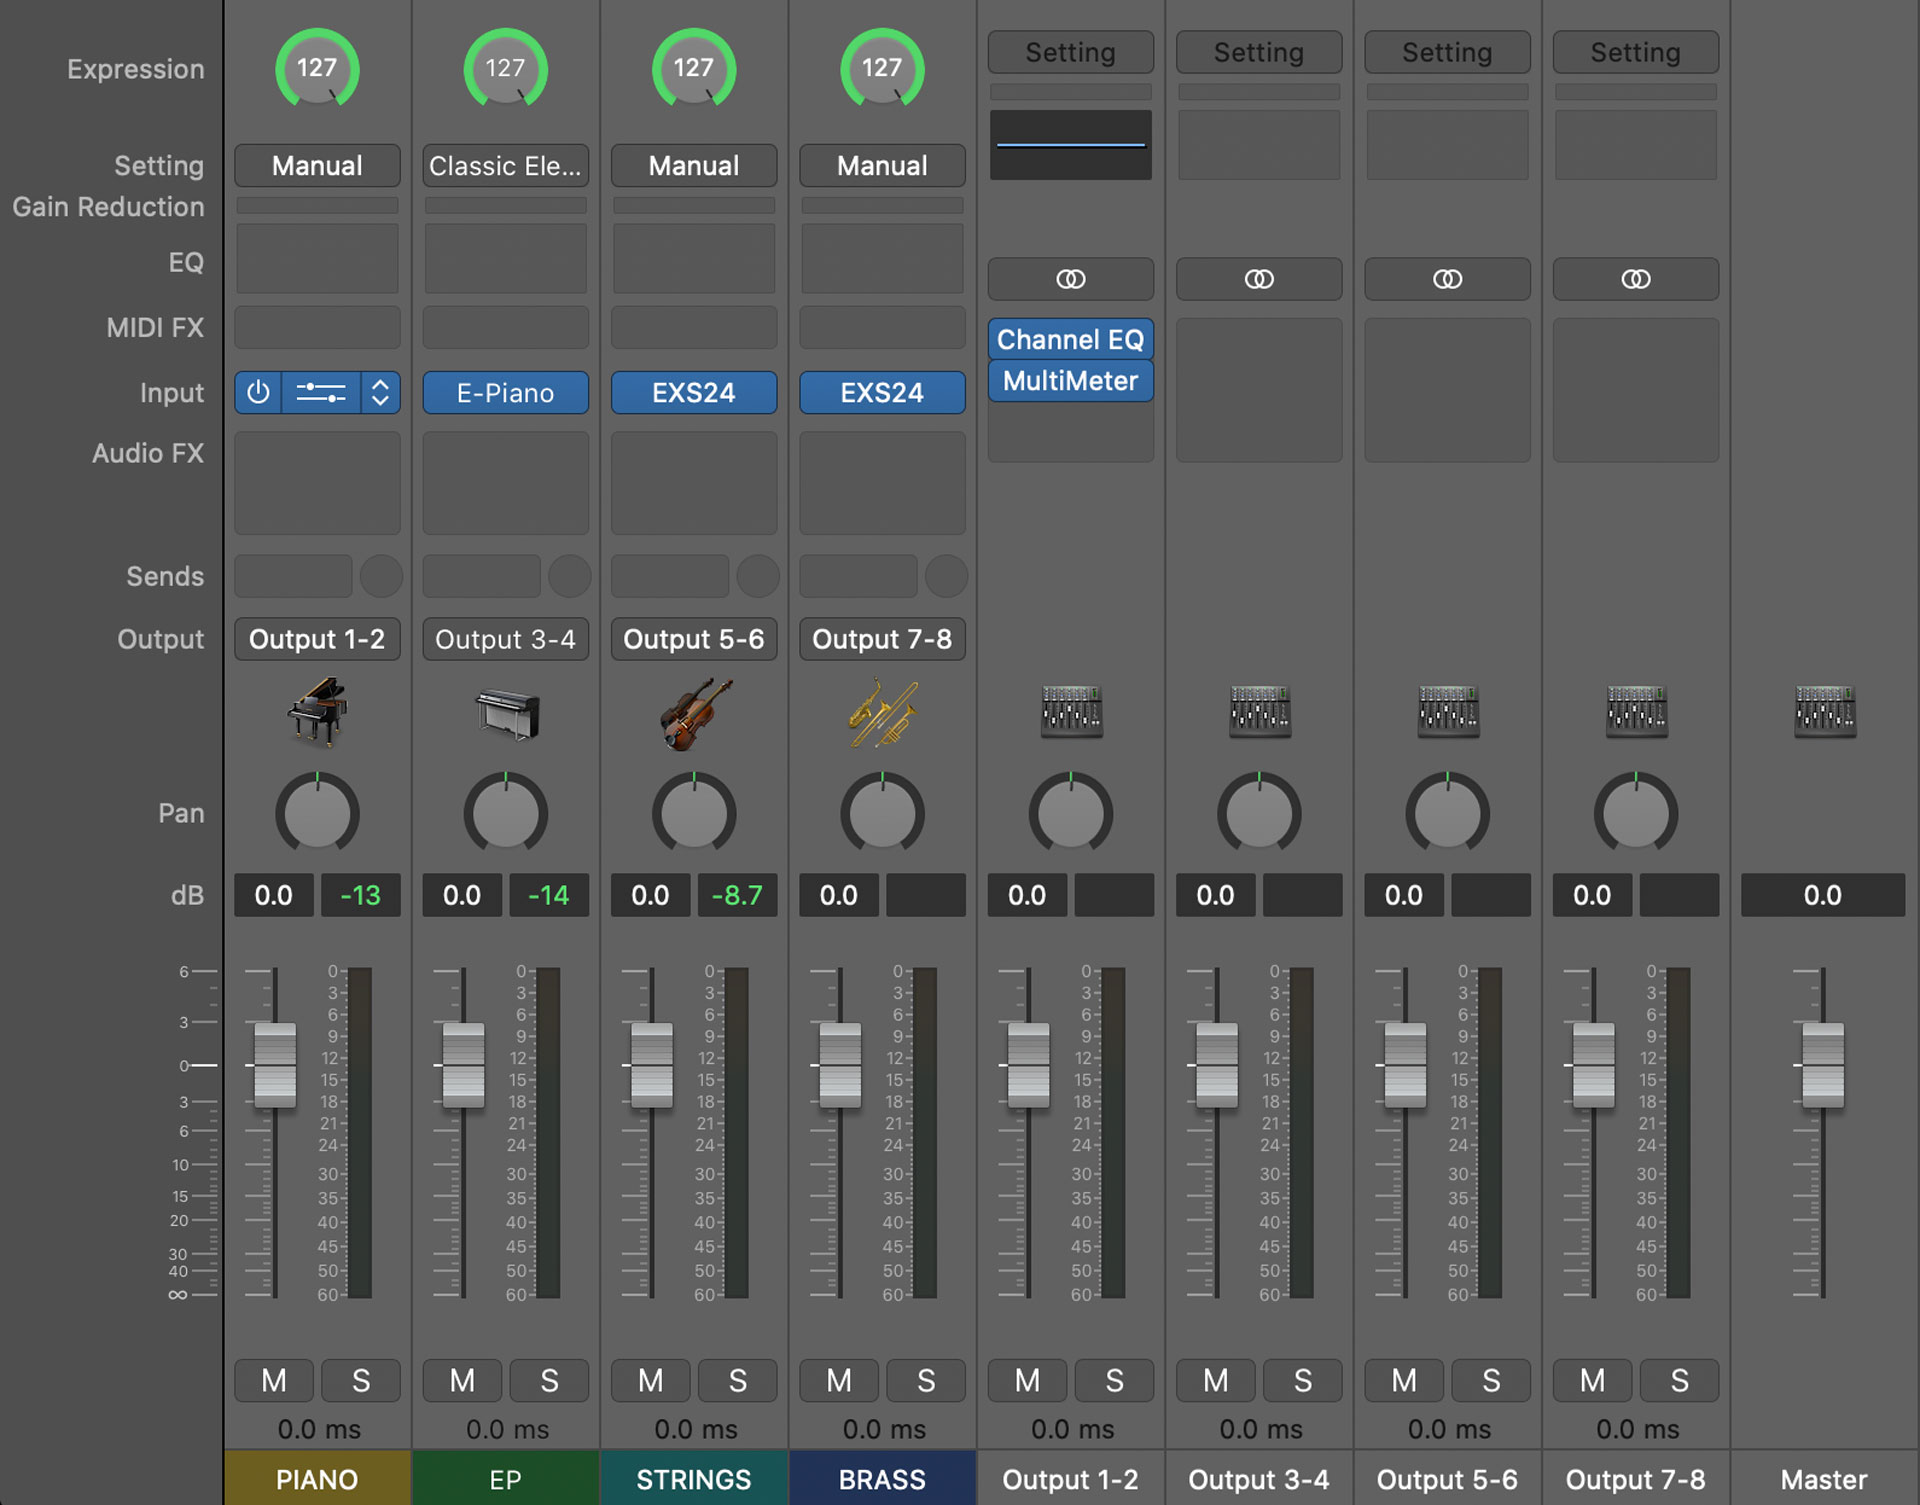 Configure MainStage to use eight channels of output.